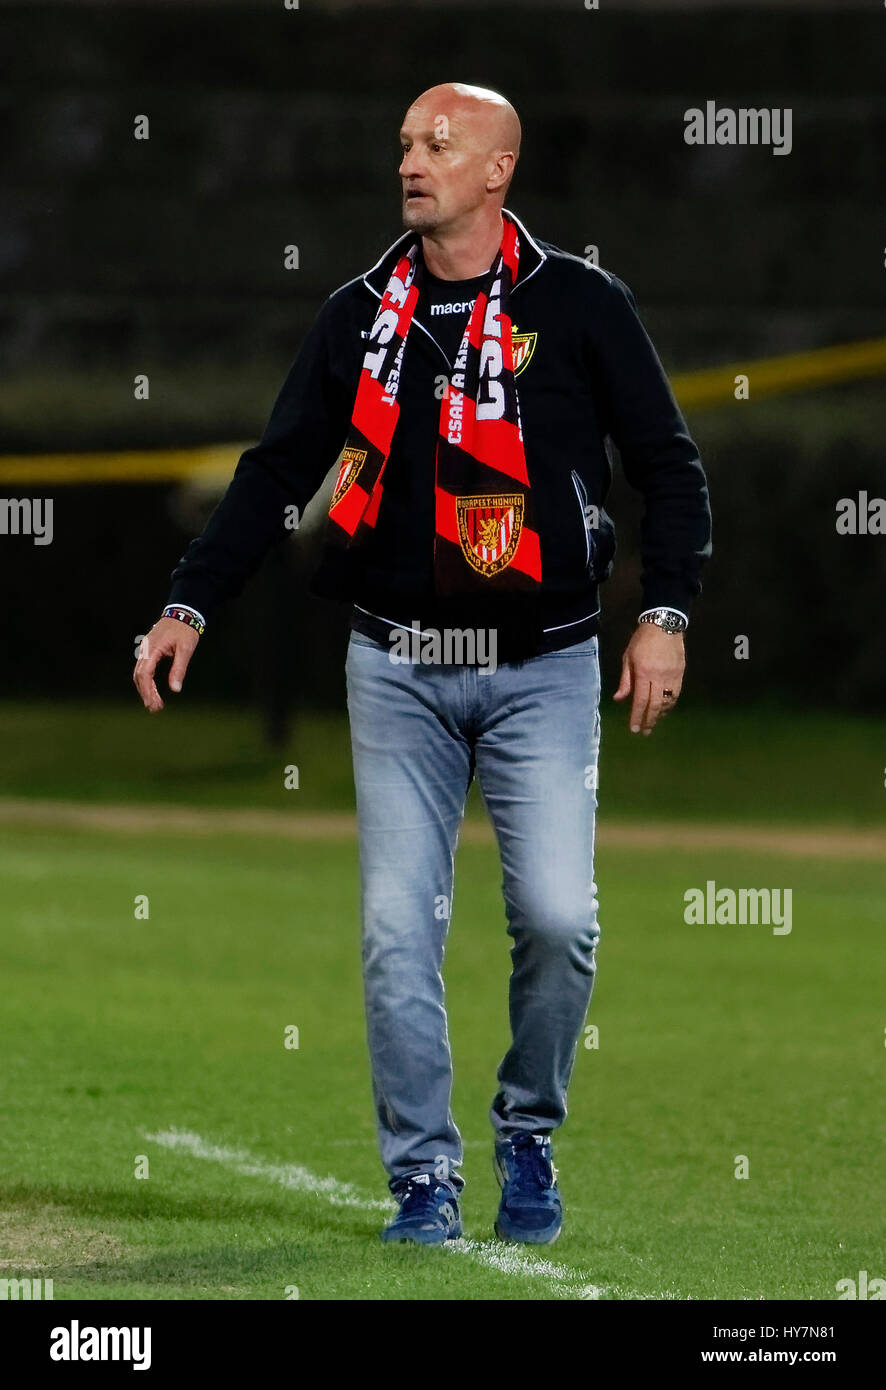 Budapest, Hungary. 1st April, 2017. Head coach Marco Rossi of Budapest Honved watches the game during the Hungarian OTP Bank Liga match between Budapest Honved and Ferencvarosi TC at Bozsik Stadium on April 1, 2017 in Budapest, Hungary. Credit: Laszlo Szirtesi/Alamy Live News Stock Photo